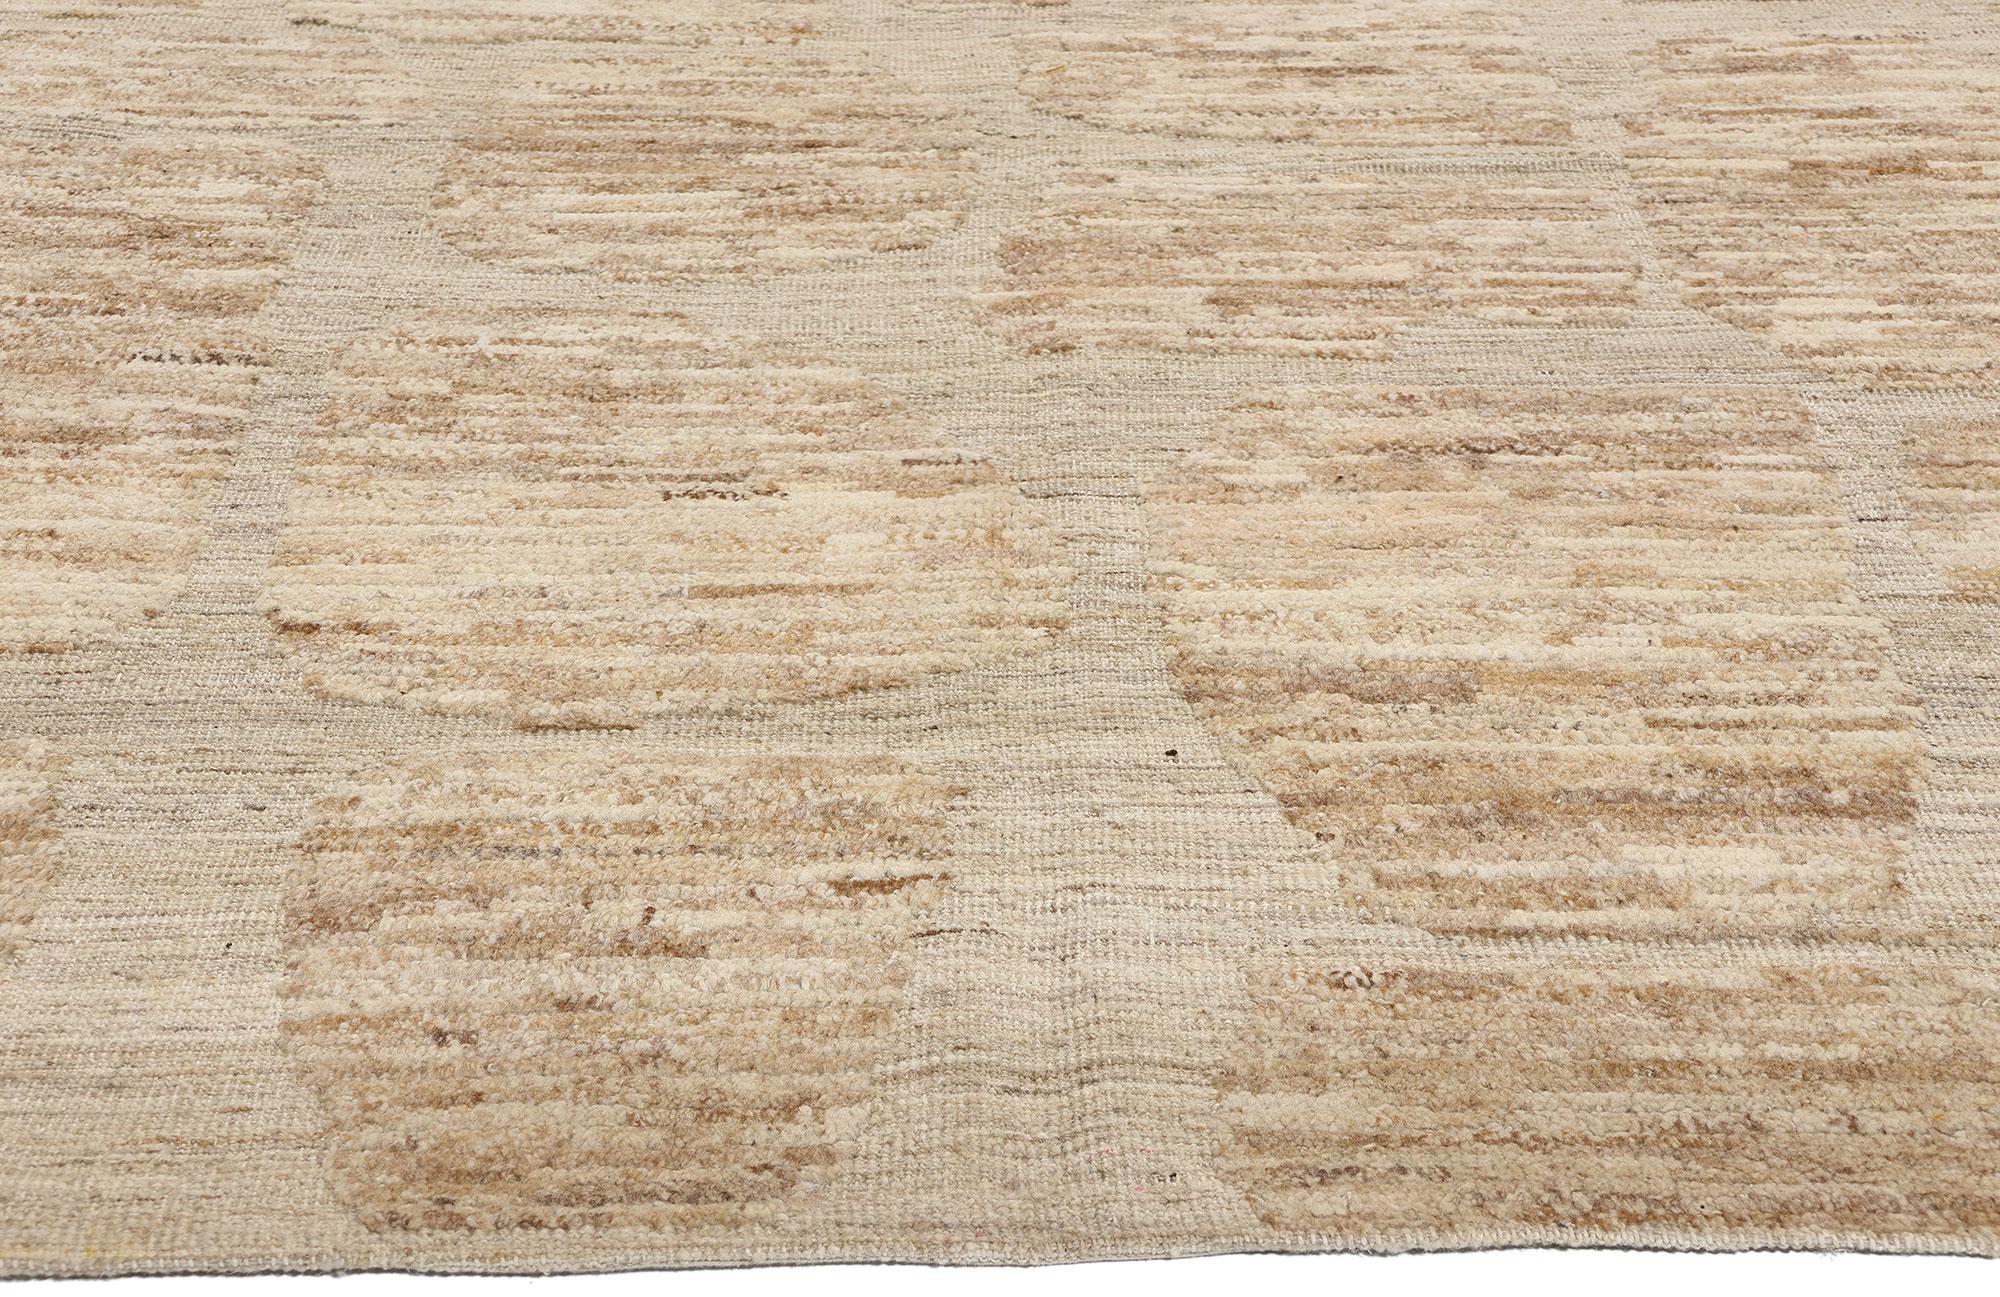 81054 Organic Modern Moroccan High-Low Rug, 07'11 x 12'11. Presenting our meticulously crafted hand-knotted wool Moroccan area rug, a seamless fusion of Biophilic Japandi and Wabi-Sabi design philosophies, expertly fashioned to infuse your home with